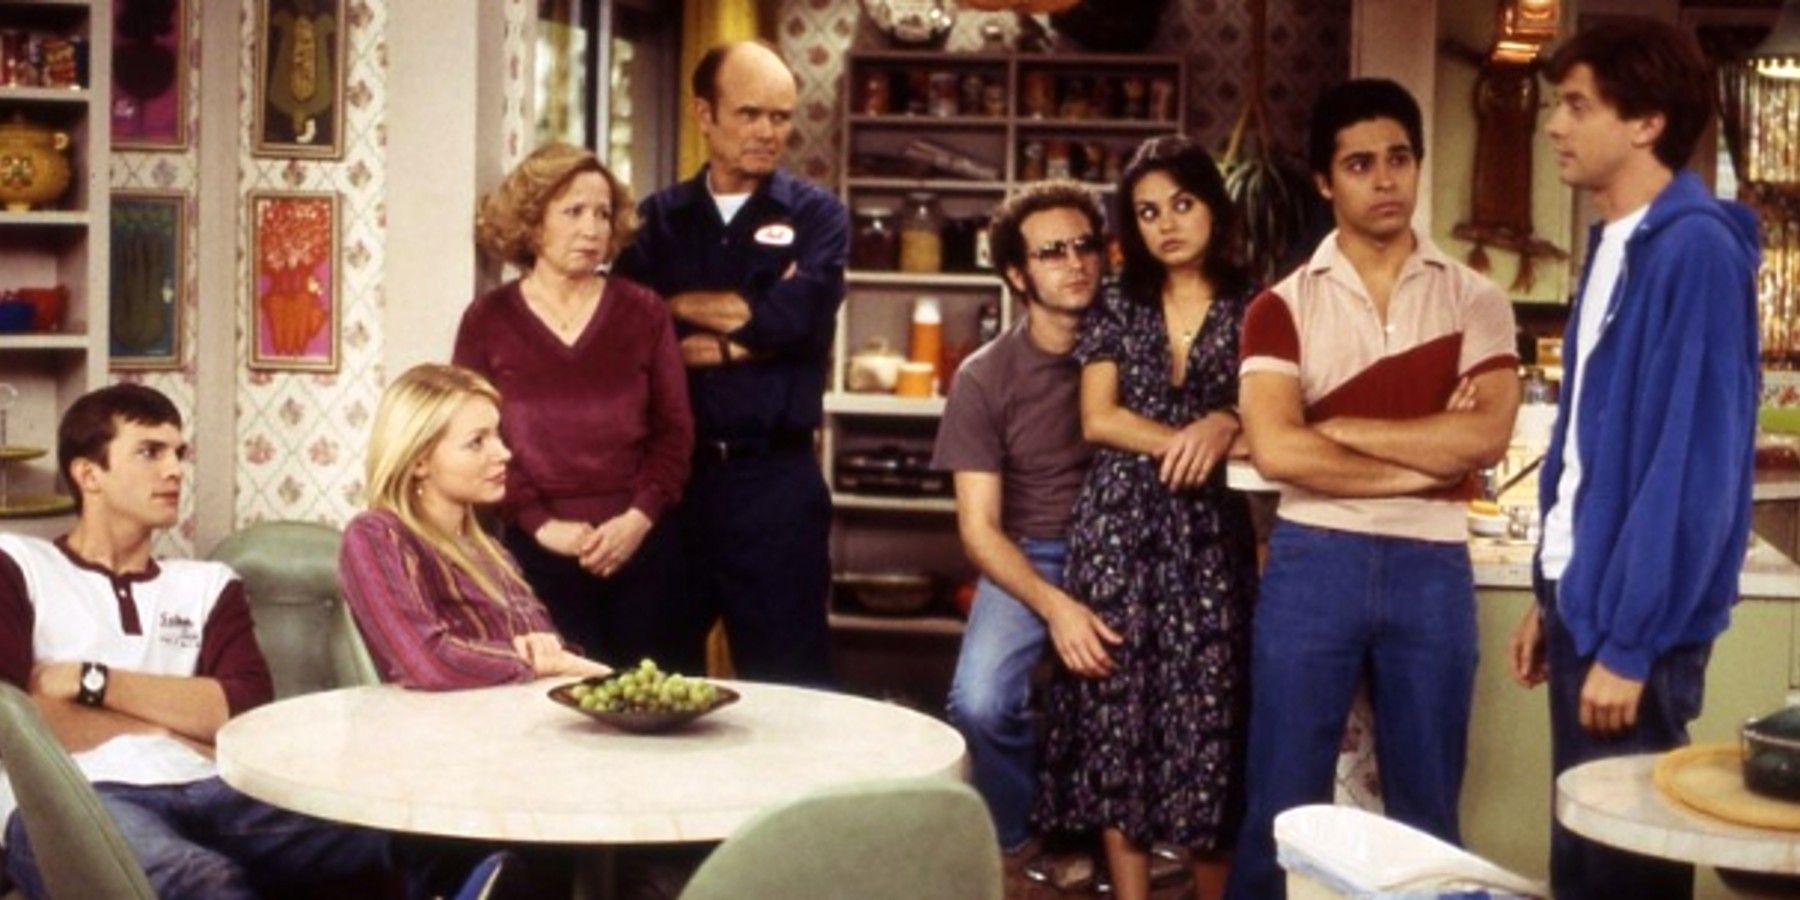 That 70s Show Unexpectedly Removed From Netflix